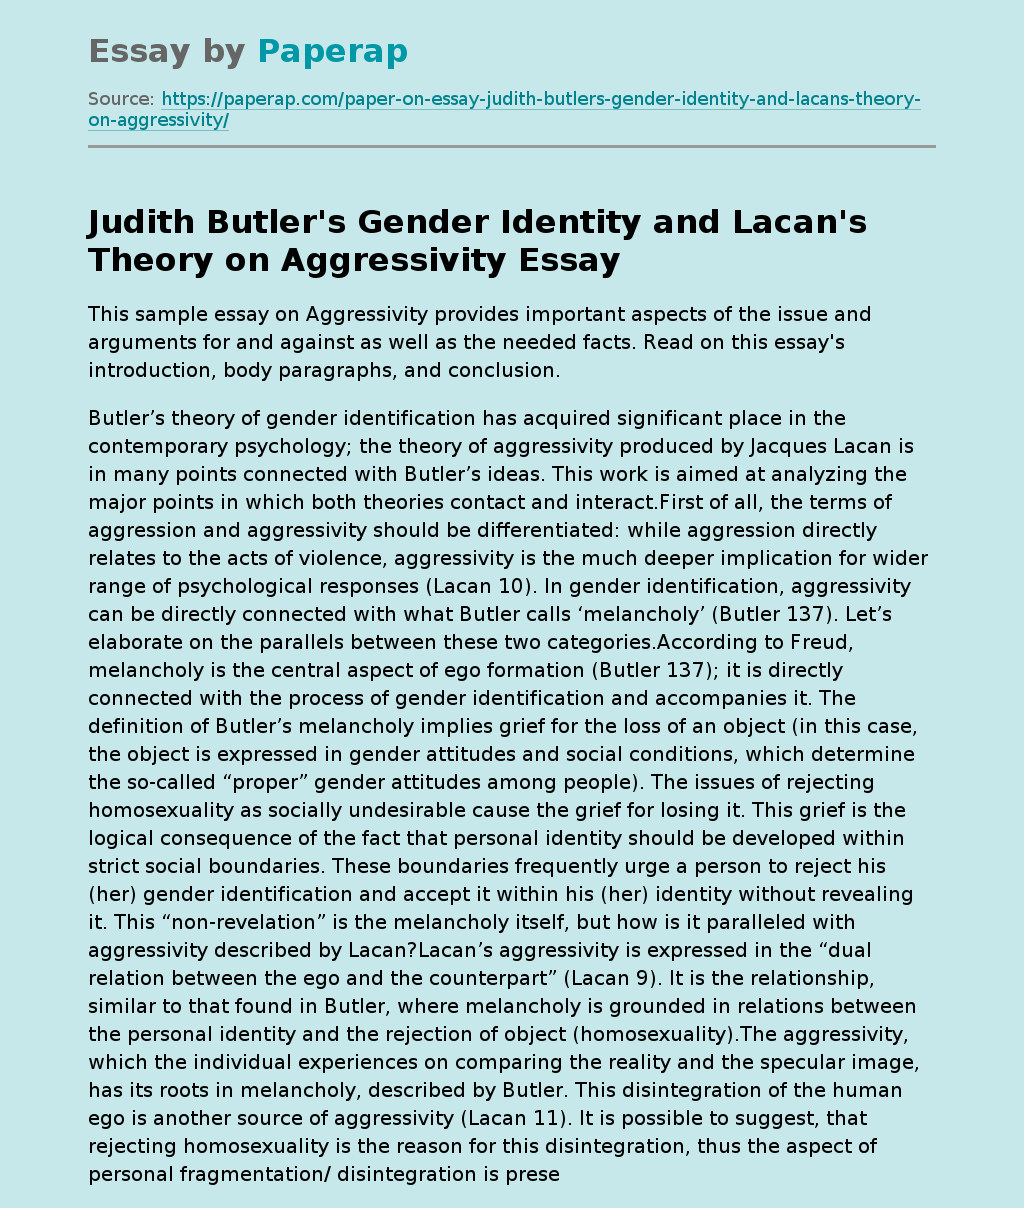 Judith Butler's Gender Identity and Lacan's Theory on Aggressivity